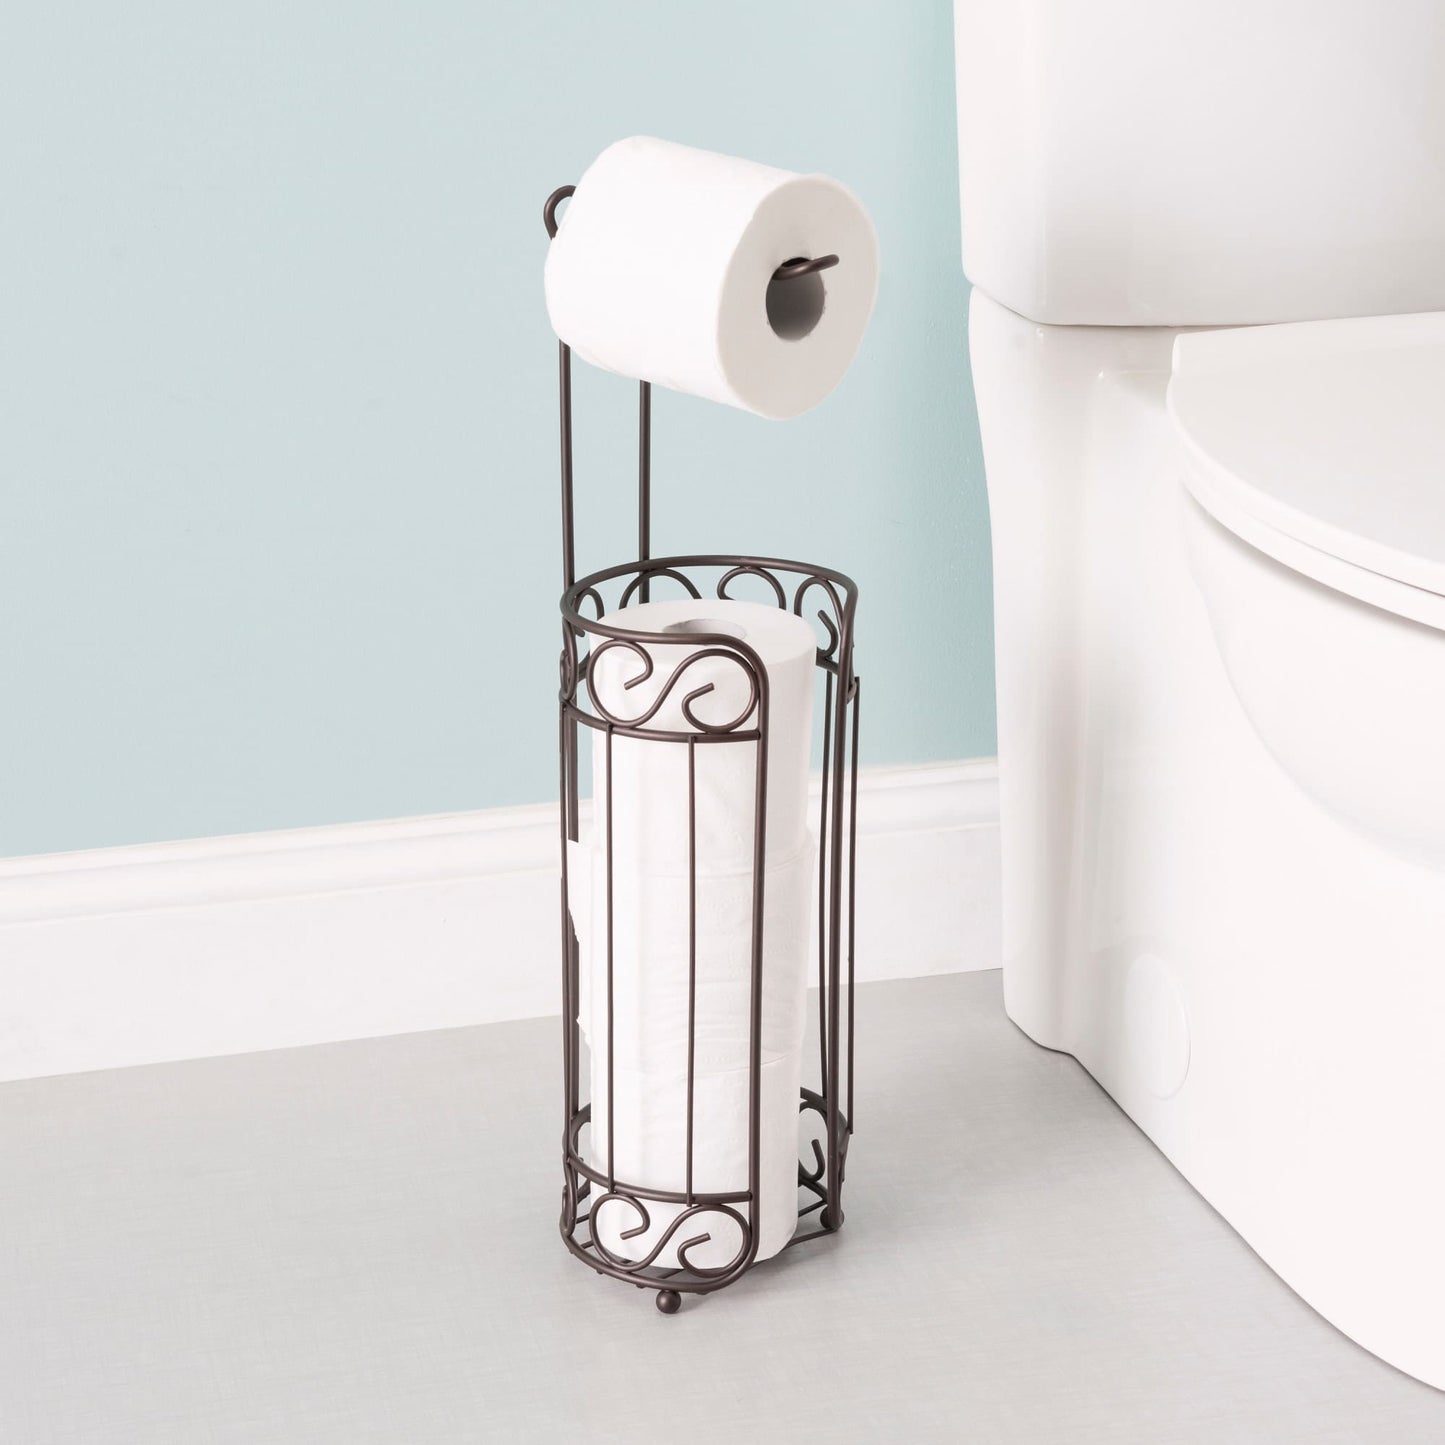 Toilet Paper Holder, Free Standing Toilet Paper Holder Stand with Reserve  for 4 Spare Rolls, Sturdy Base, Toilet Tissue Paper Roll Storage Shelf